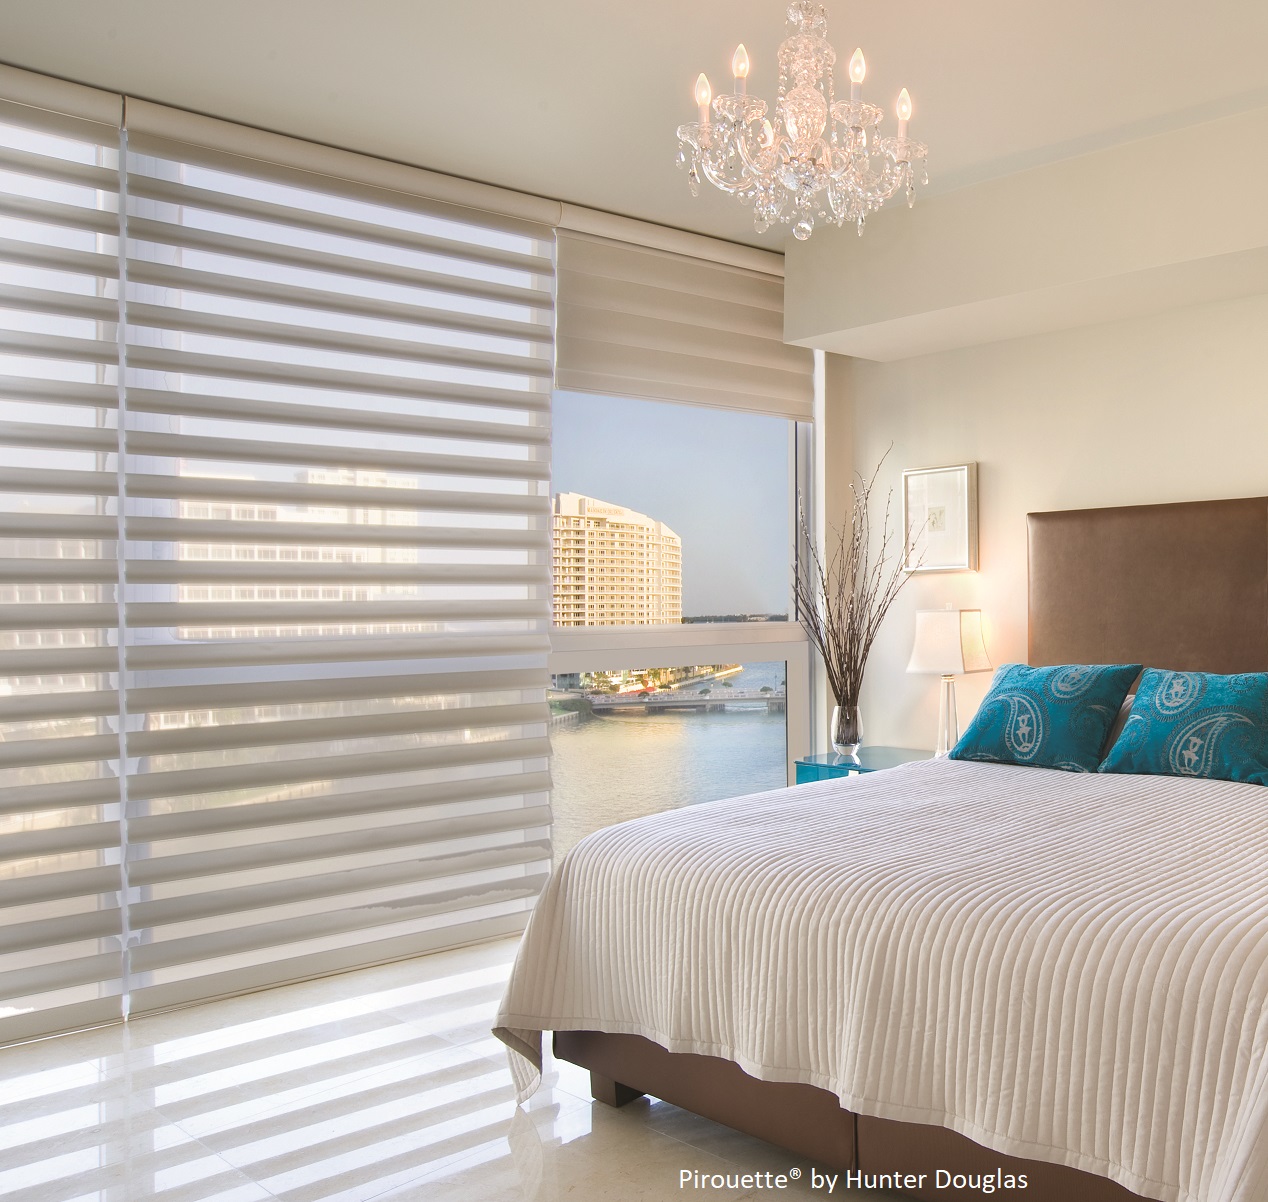 Pirouette sheer shades and blinds in the bedroom